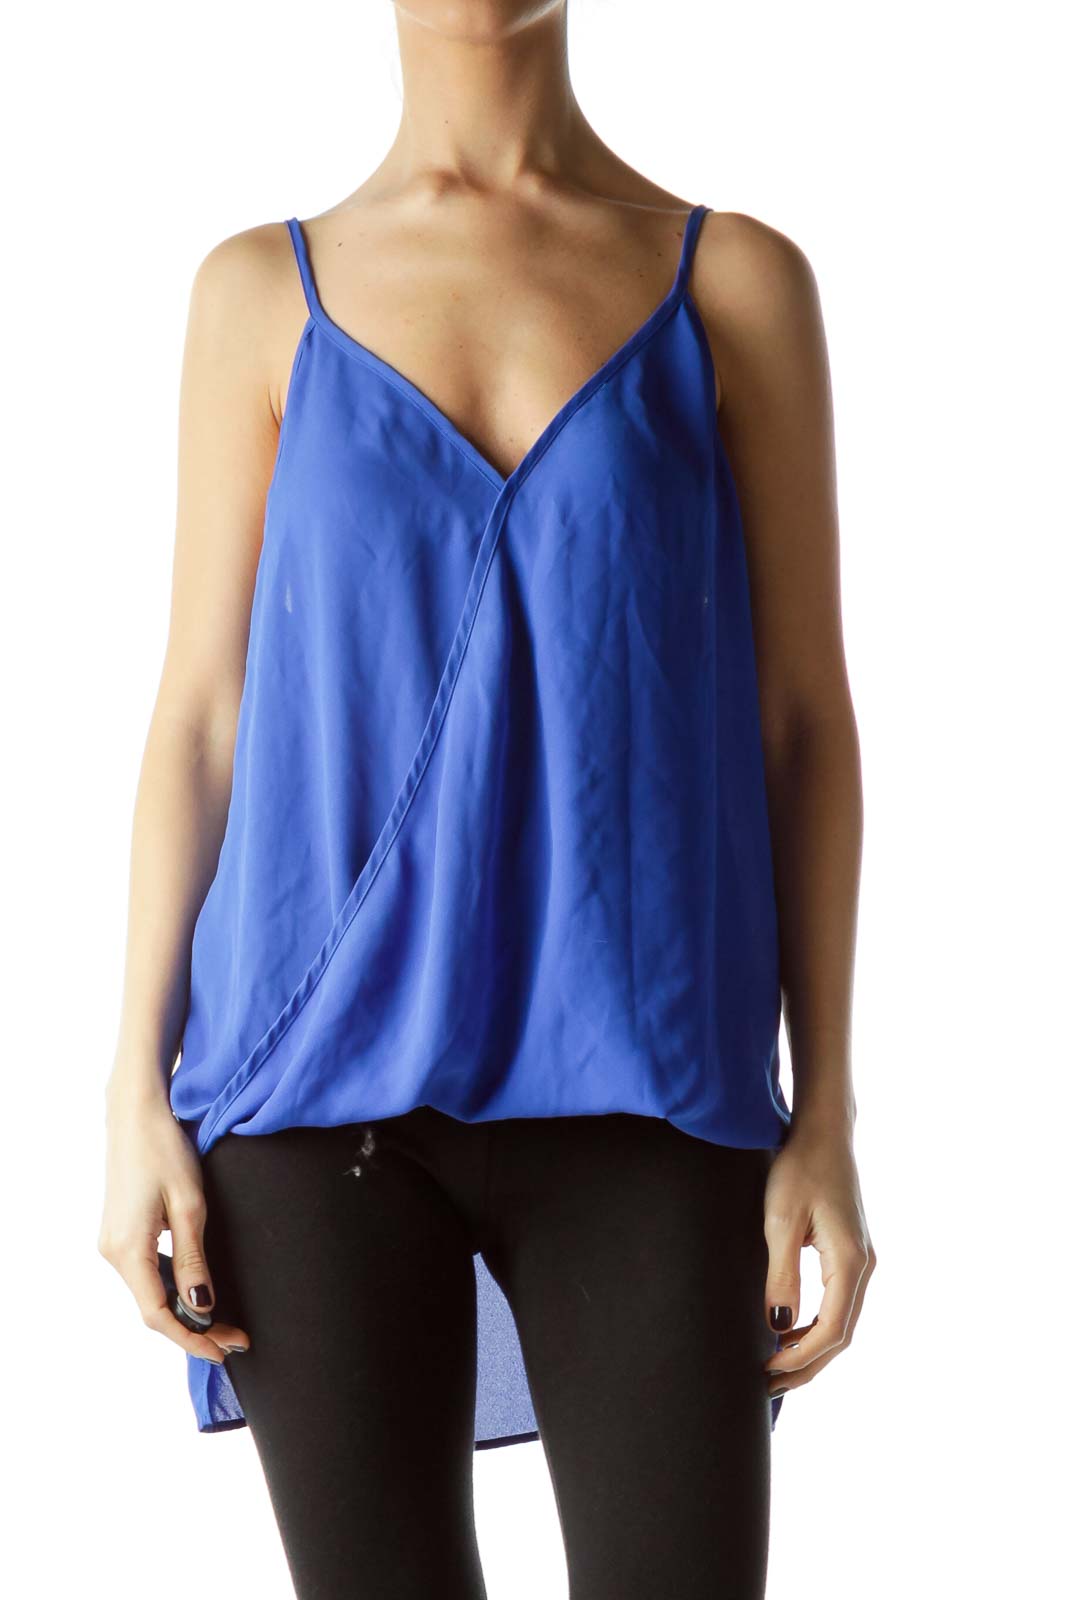 Electric Blue Spaghetti Straps Flared Top Front